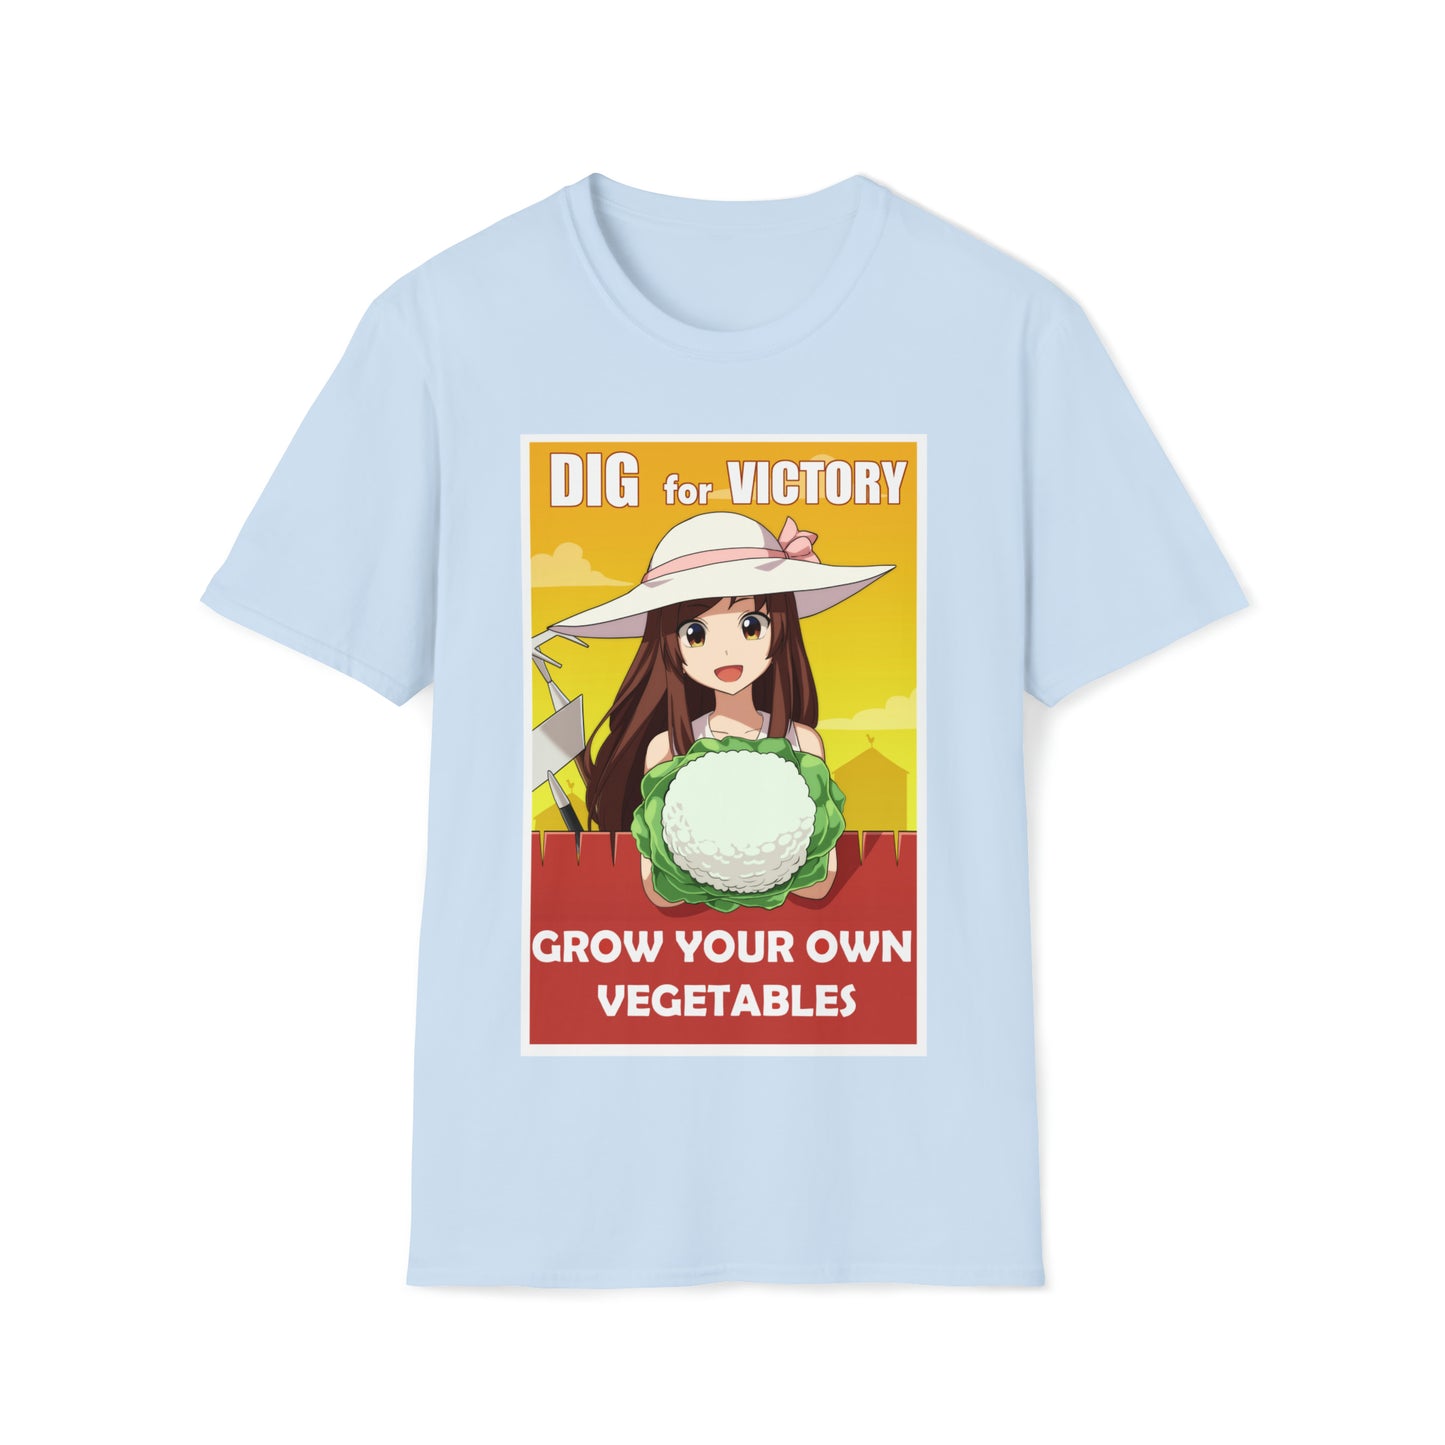 New Dig for Victory! Shirt